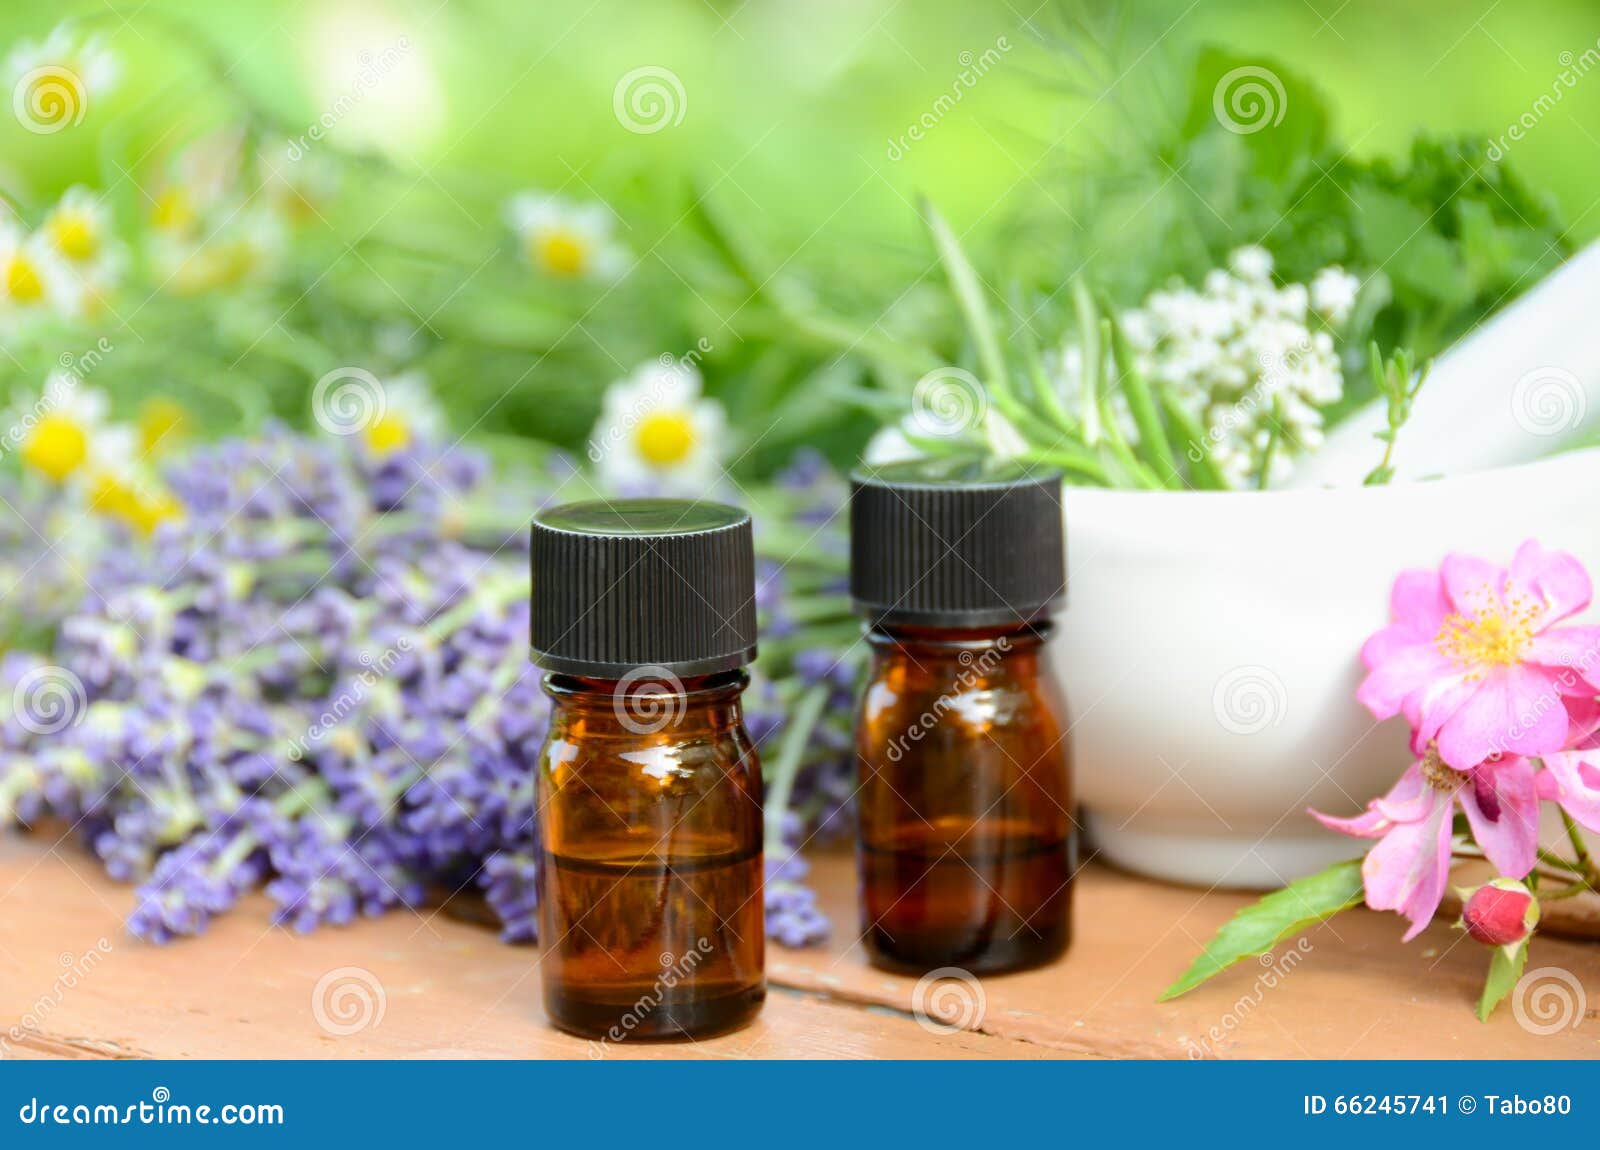 natural apothecary with essential oils